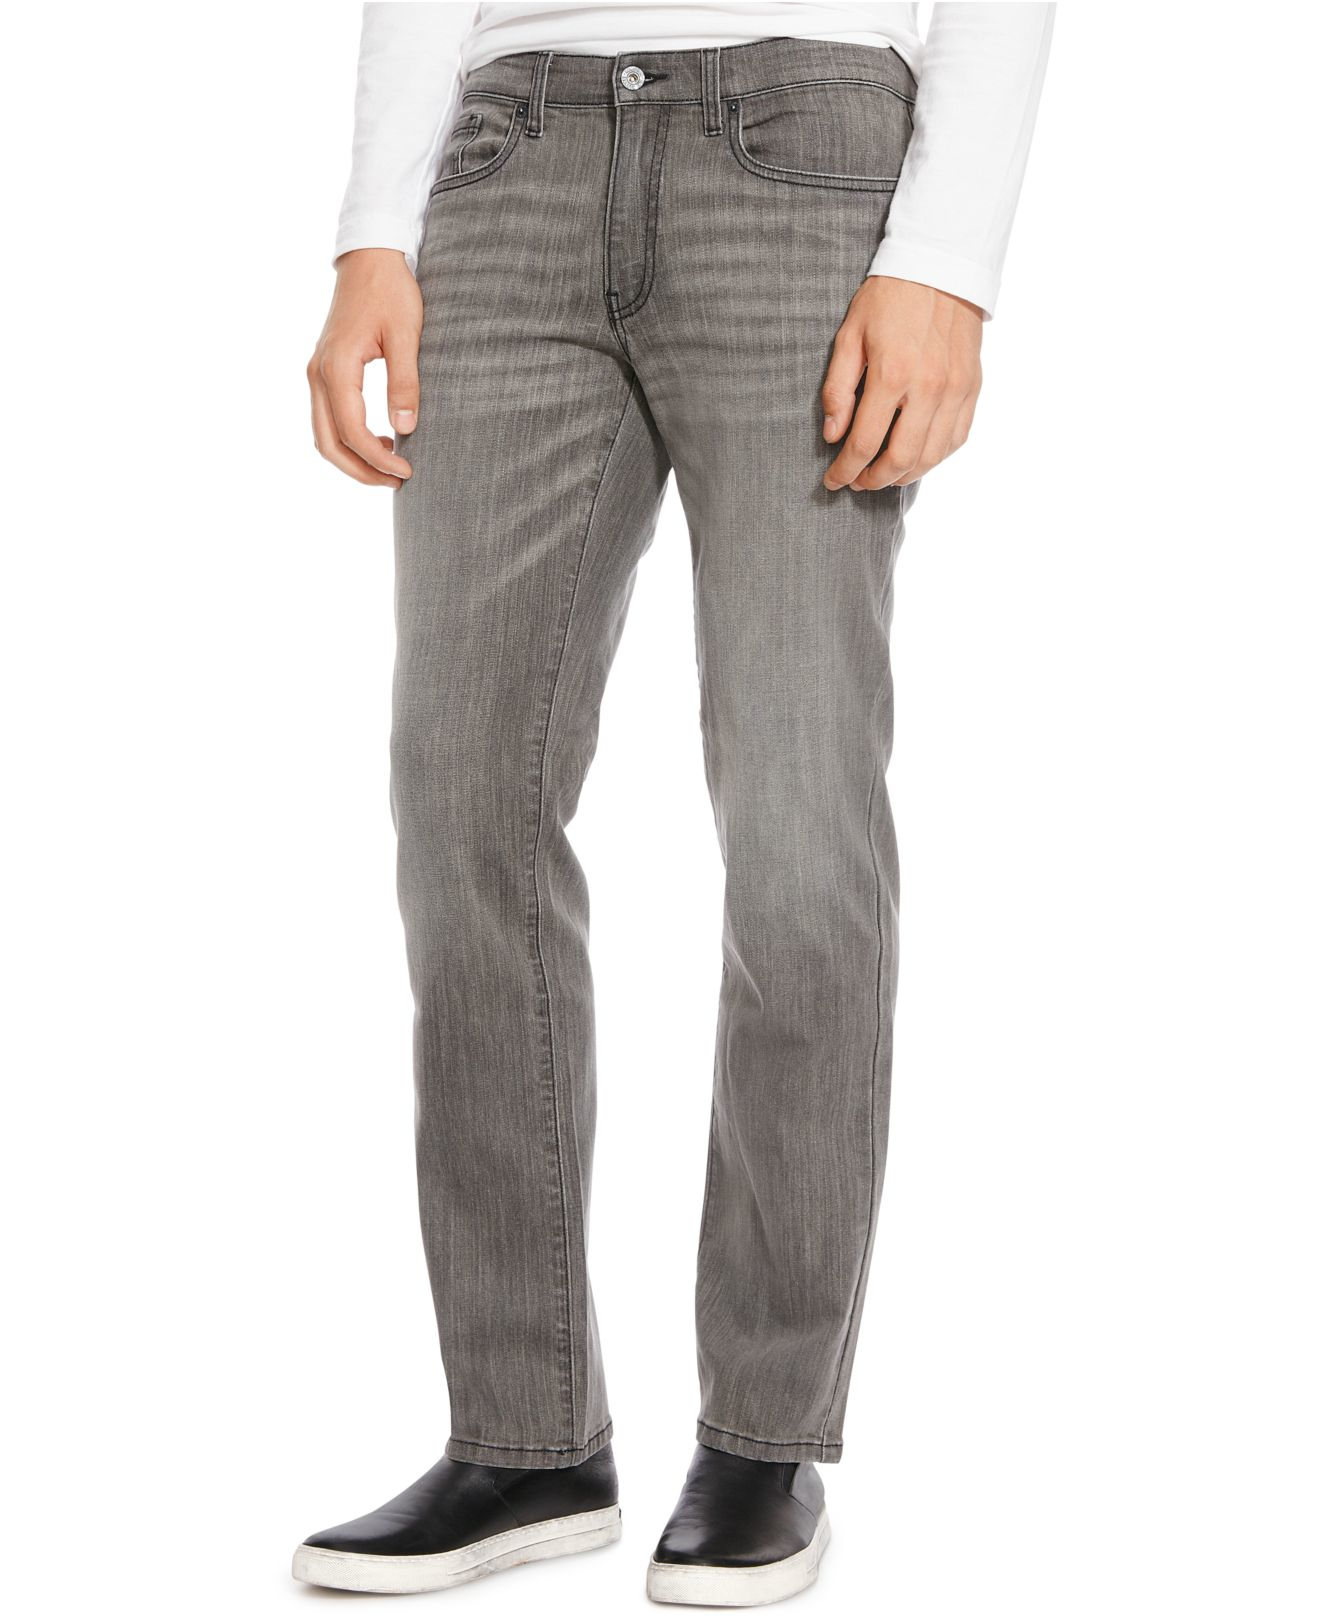 Lyst - Kenneth Cole Reaction Eric Gray Wash Jeans in Gray for Men